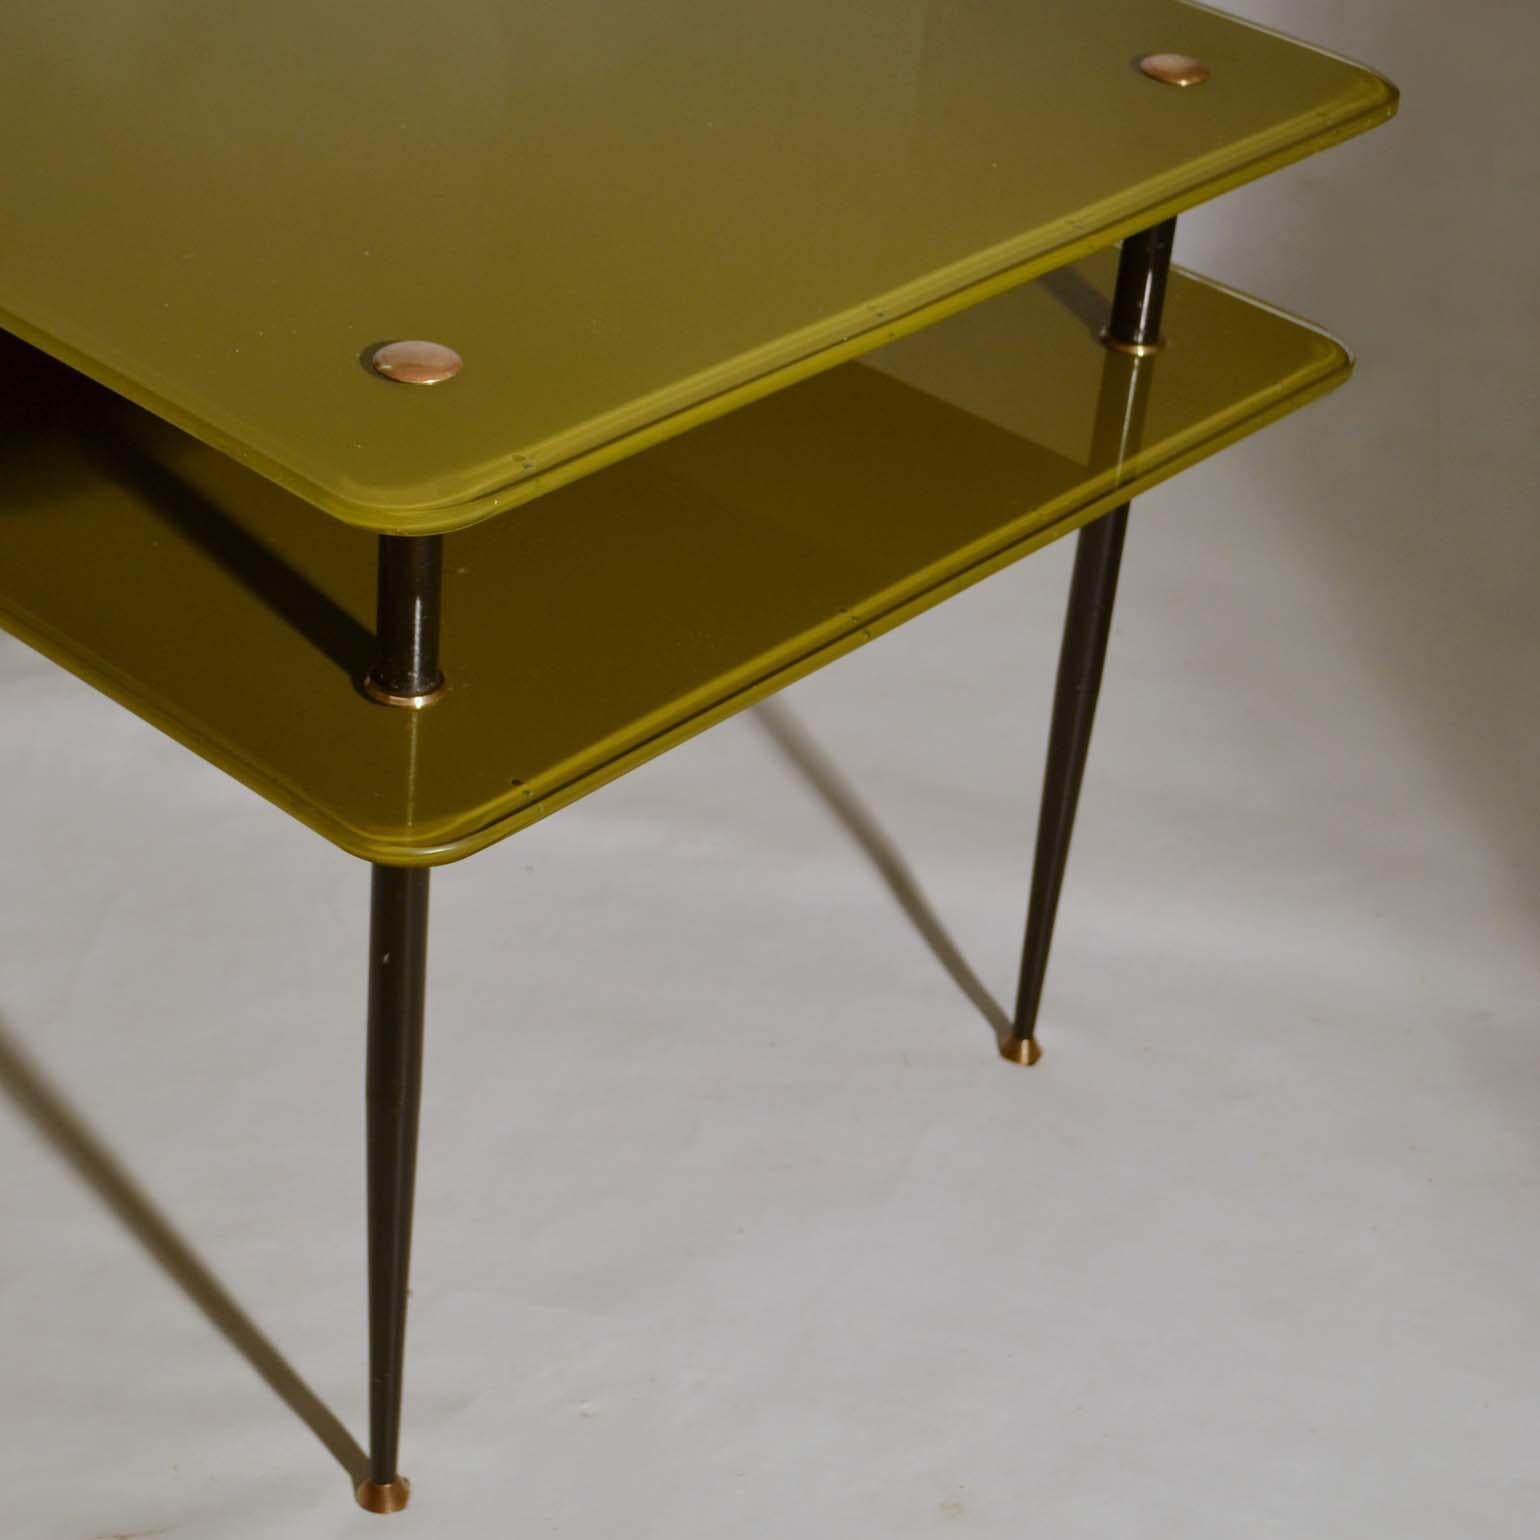 Olive Green Glass Coffee Table by Eduardo Paoli for Vitrex, Italy 1950s For Sale 1